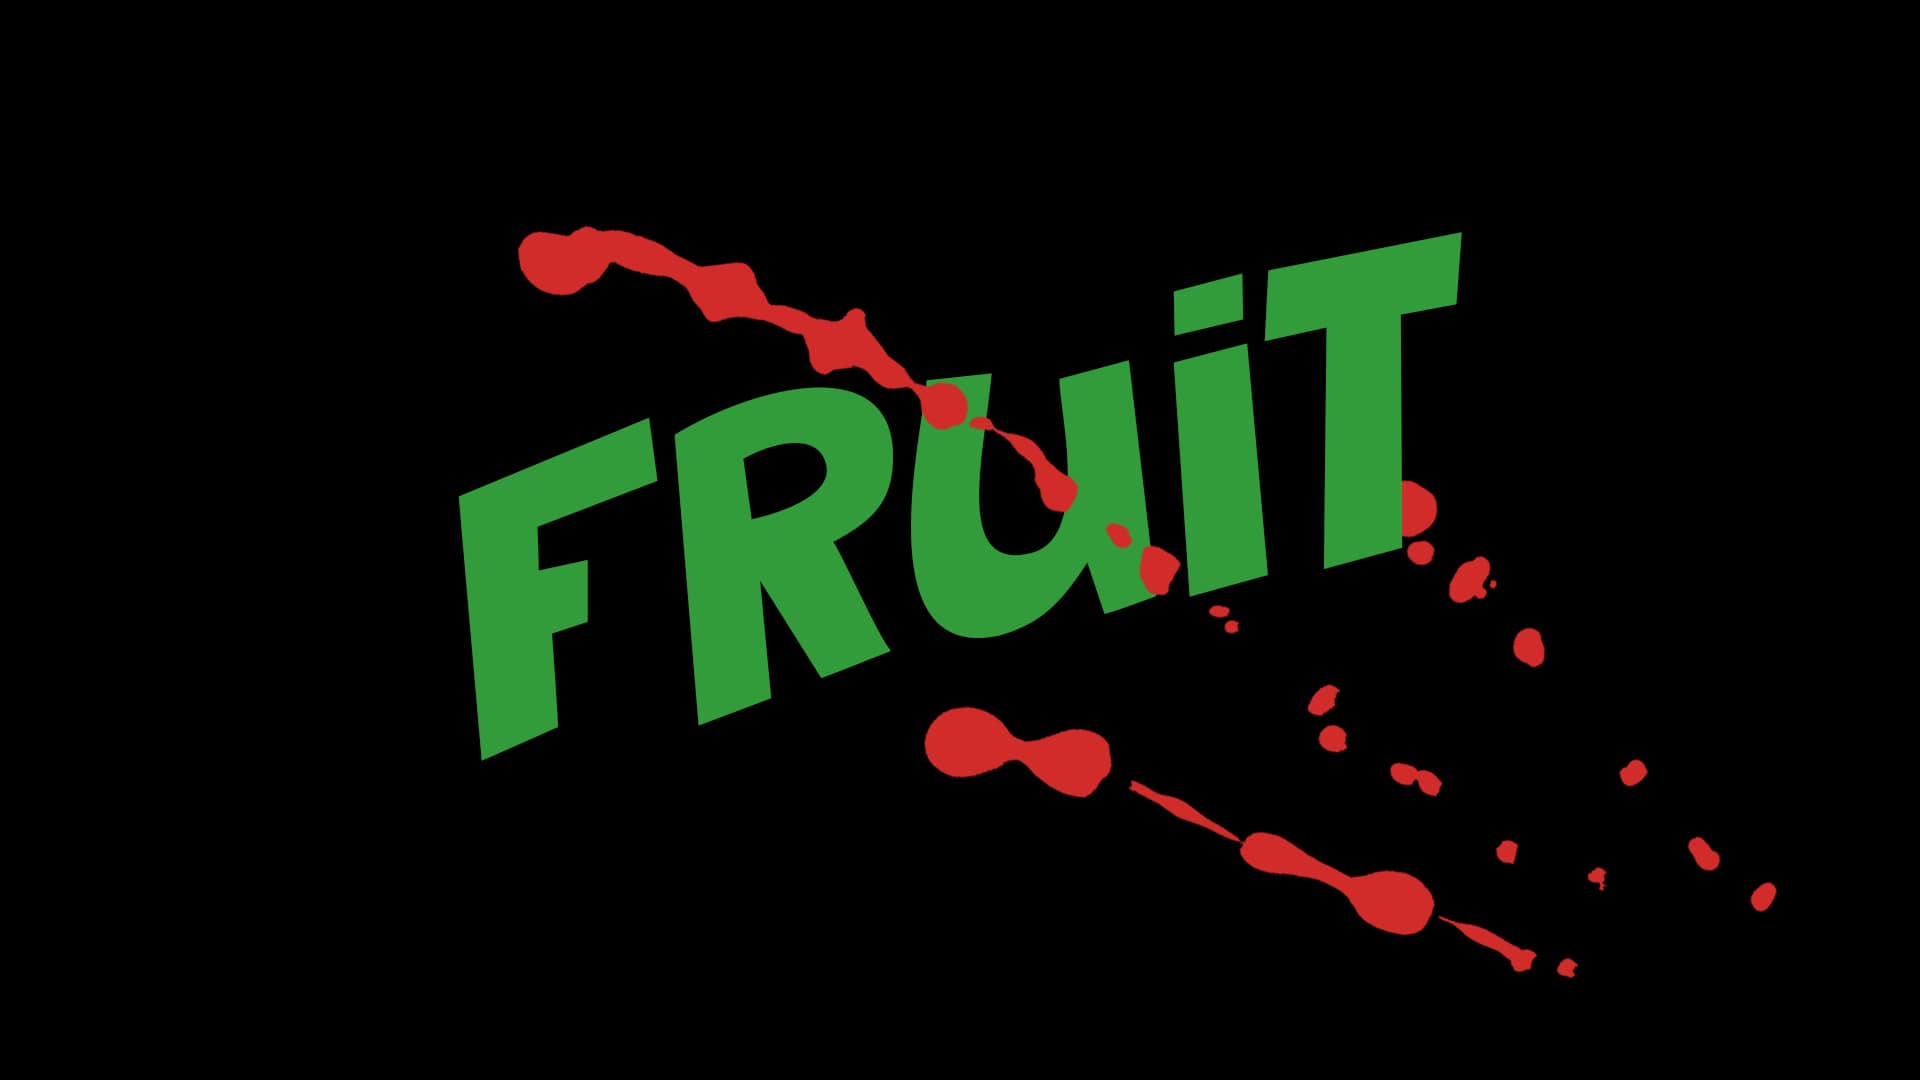 Fruit a crime comedy fiction novel by Will Heron